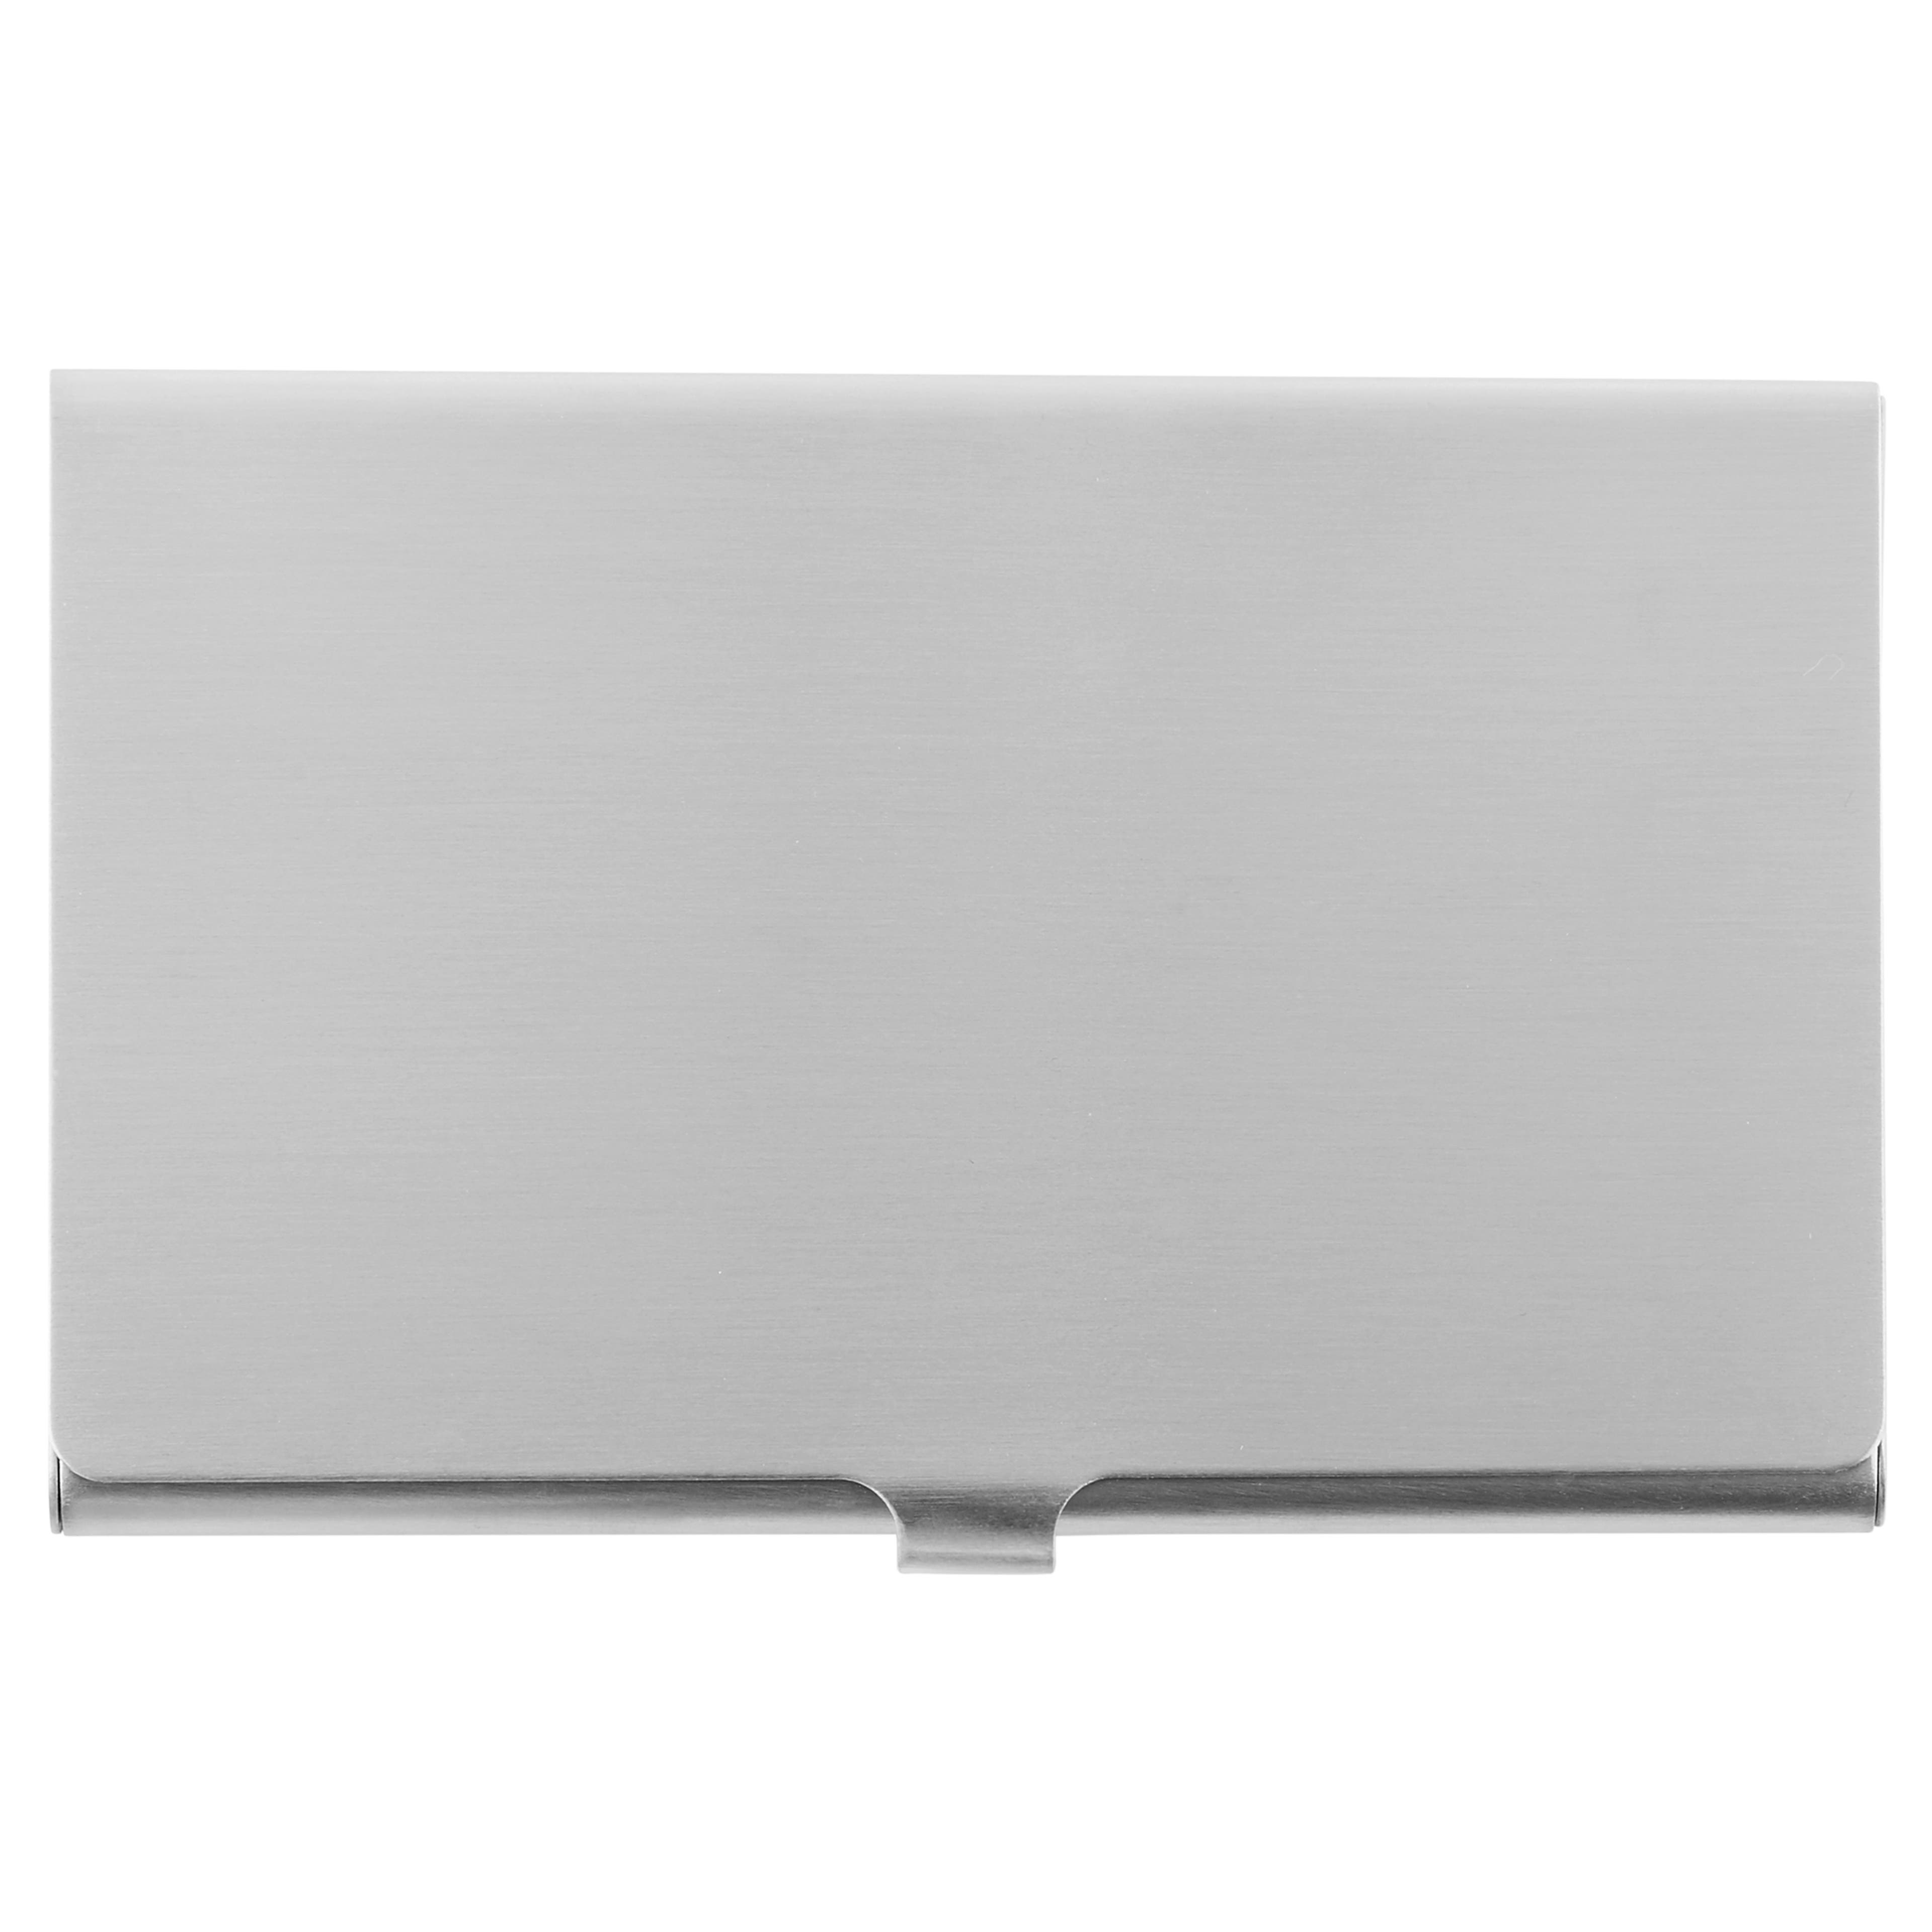 Slim Silver-Tone Brushed Stainless Steel Card Holder